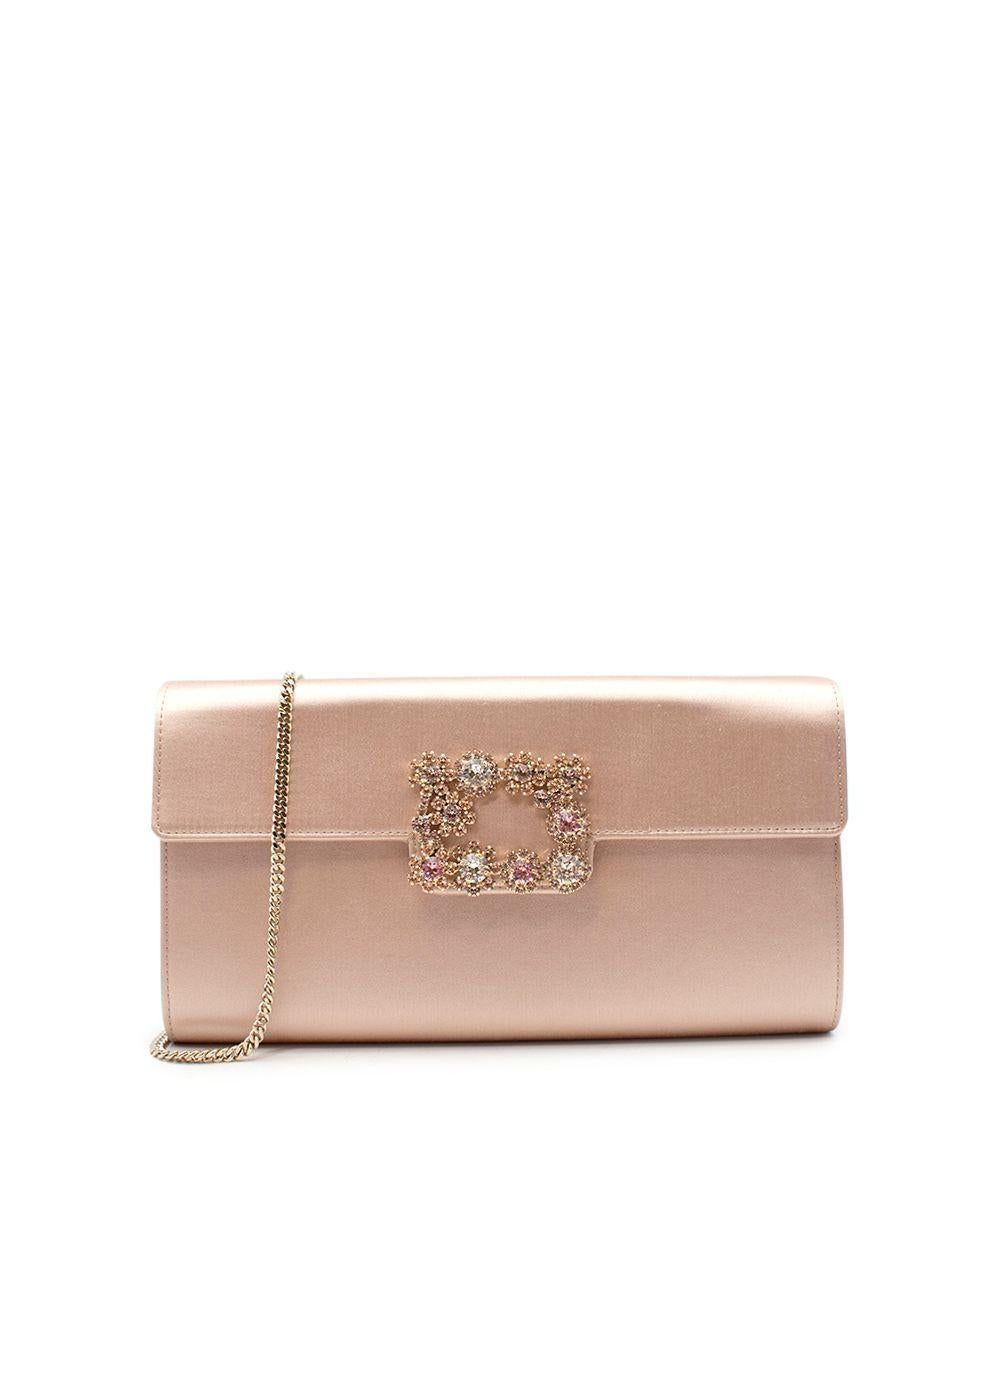 Roger Vivier Nude-Pink Satin Flower Strass Chain Clutch

- Classic flap clutch in nude-pink satin with lustre
- Adorned with a signature square-shaped brooch with floral motifs
- Magnet closure
- Rose-gold tone metal chain strap
-Two internal